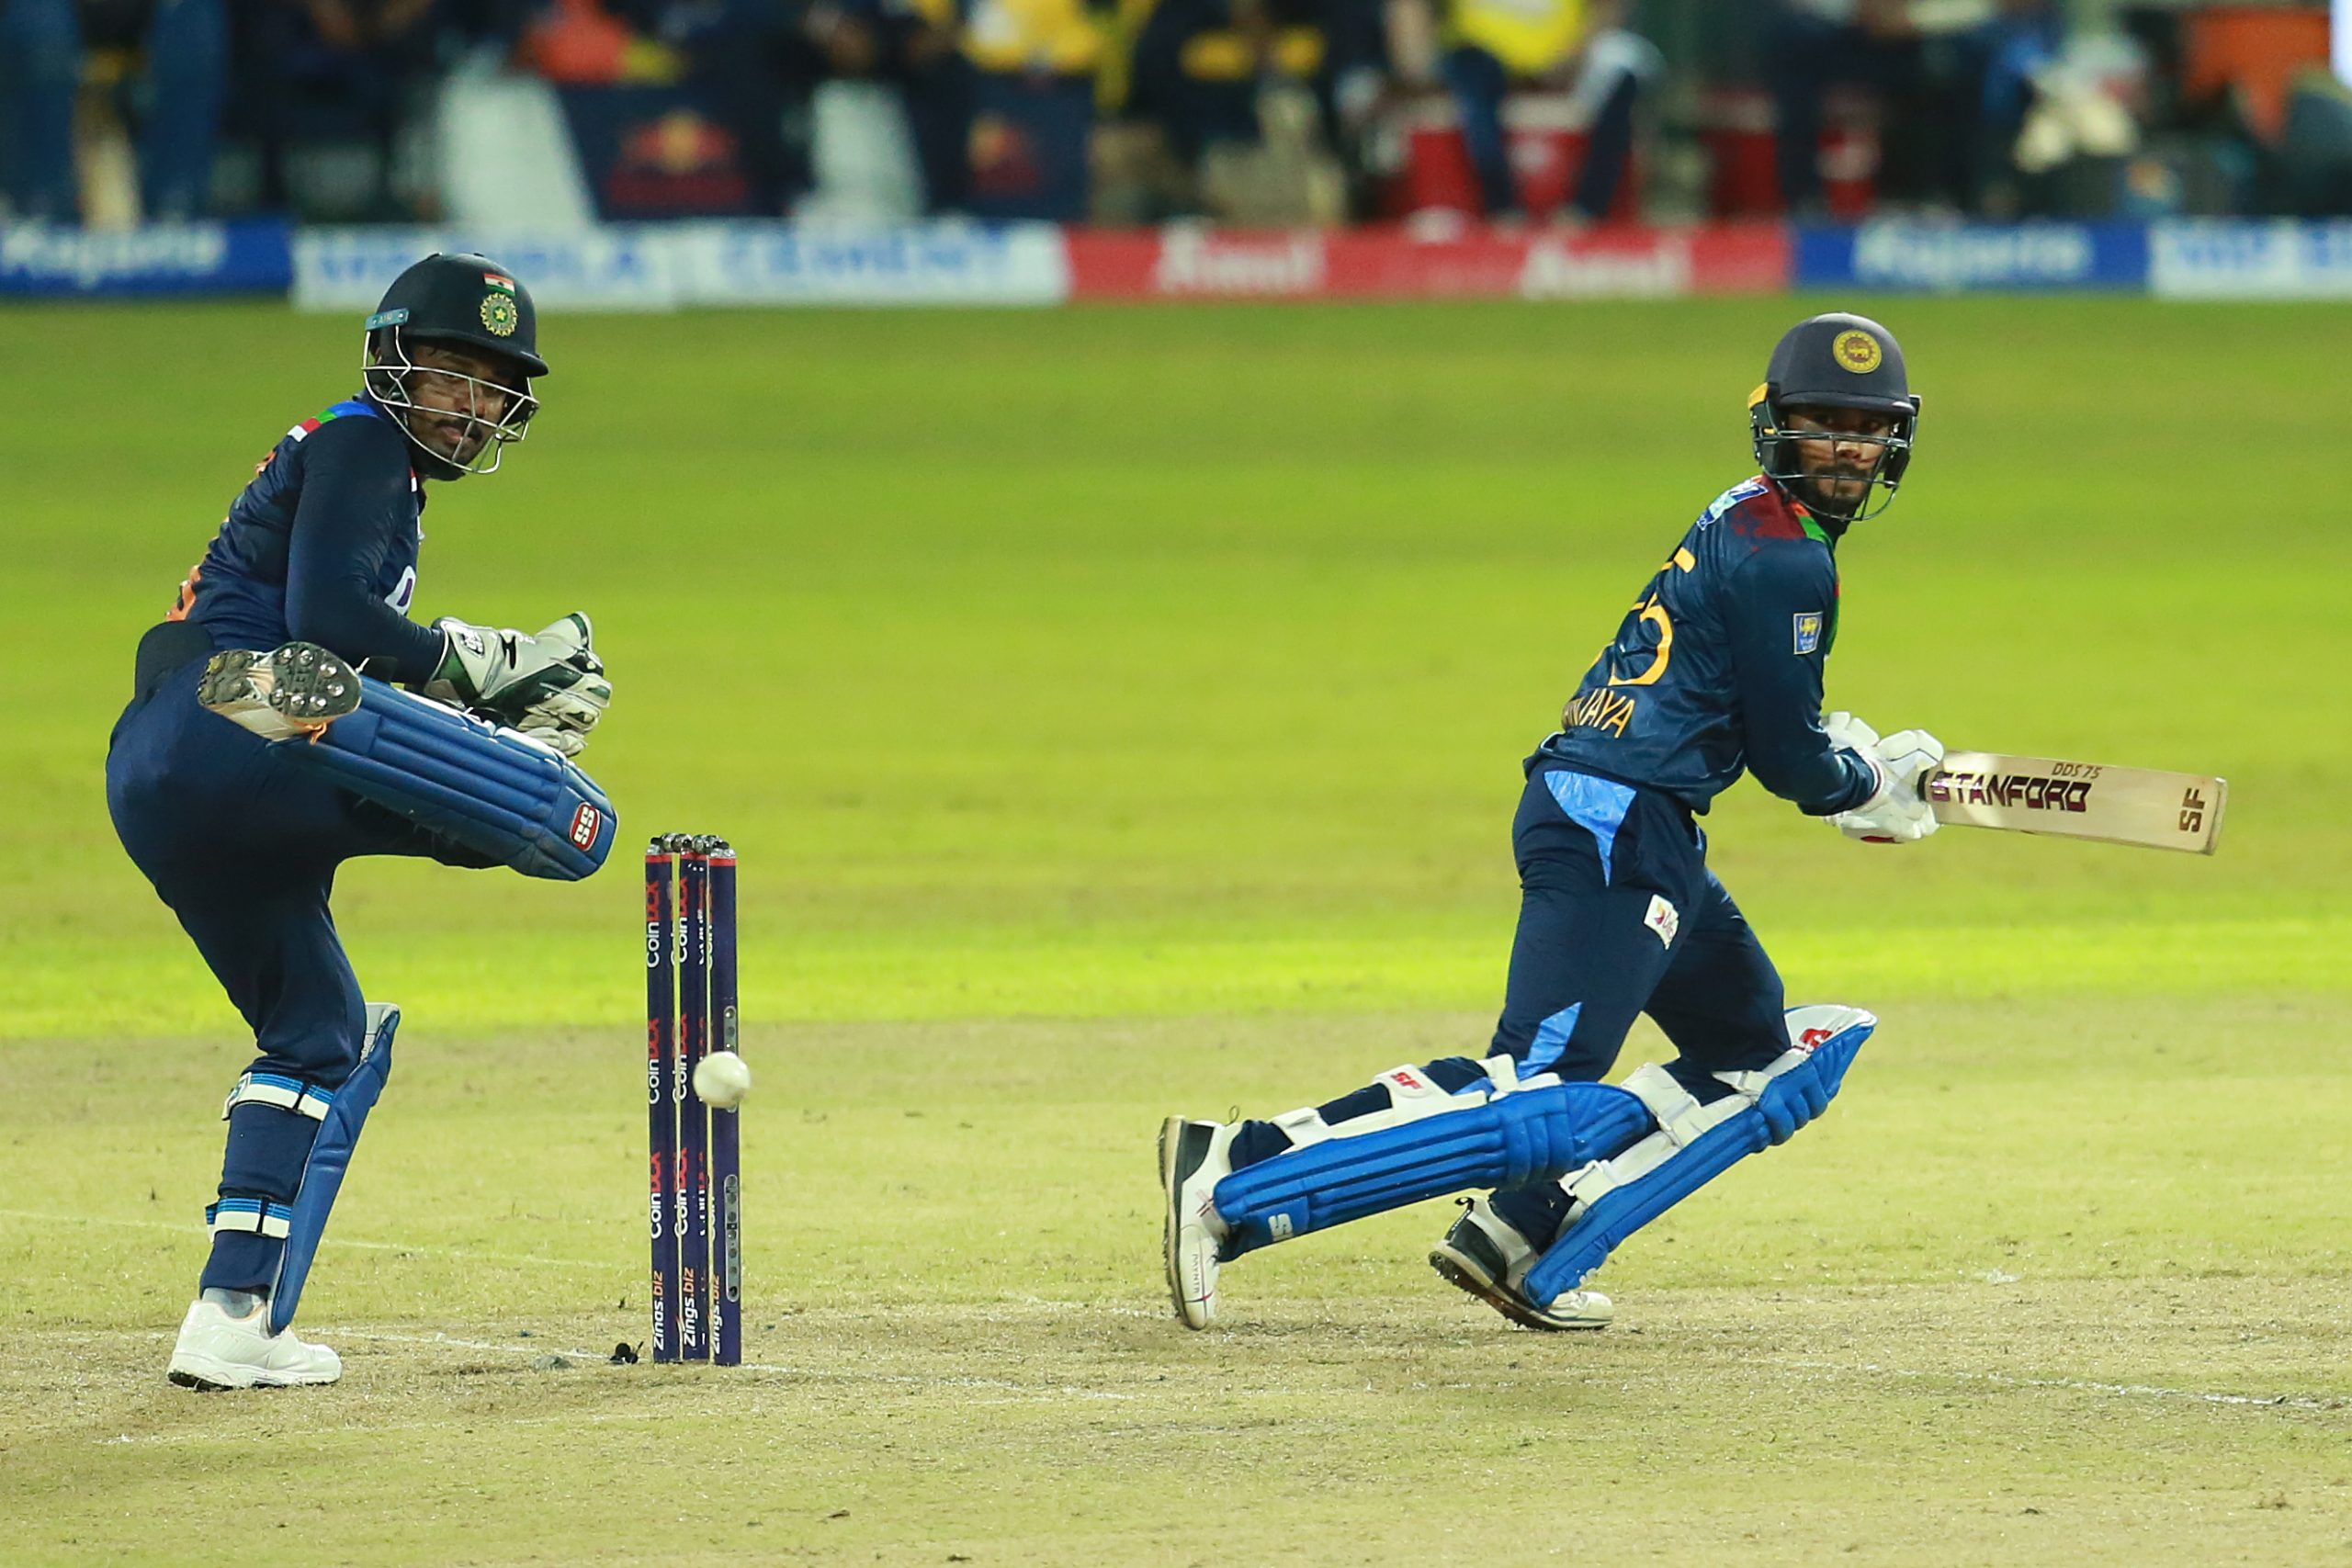 Dhananjaya de Silva bats Sri Lanka to victory with unbeaten 40 with two balls to spare